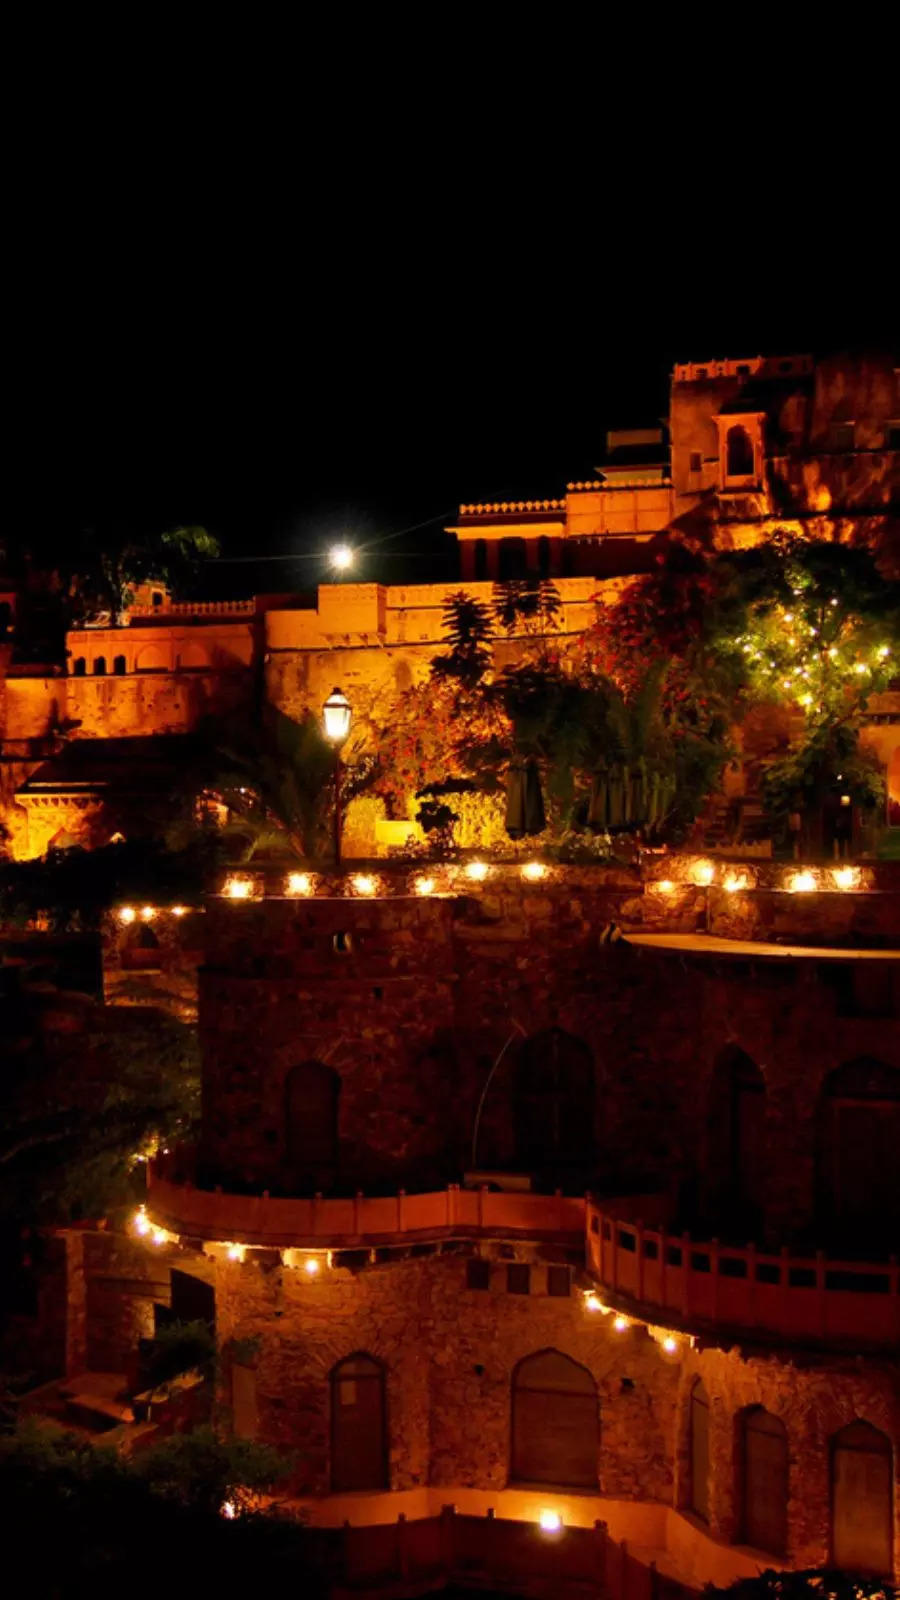 About 122 km from Delhi, Neemrana Fort Palace is a 15th-century heritage hotel offering panoramic views and a glimpse into Rajasthan's royal history.